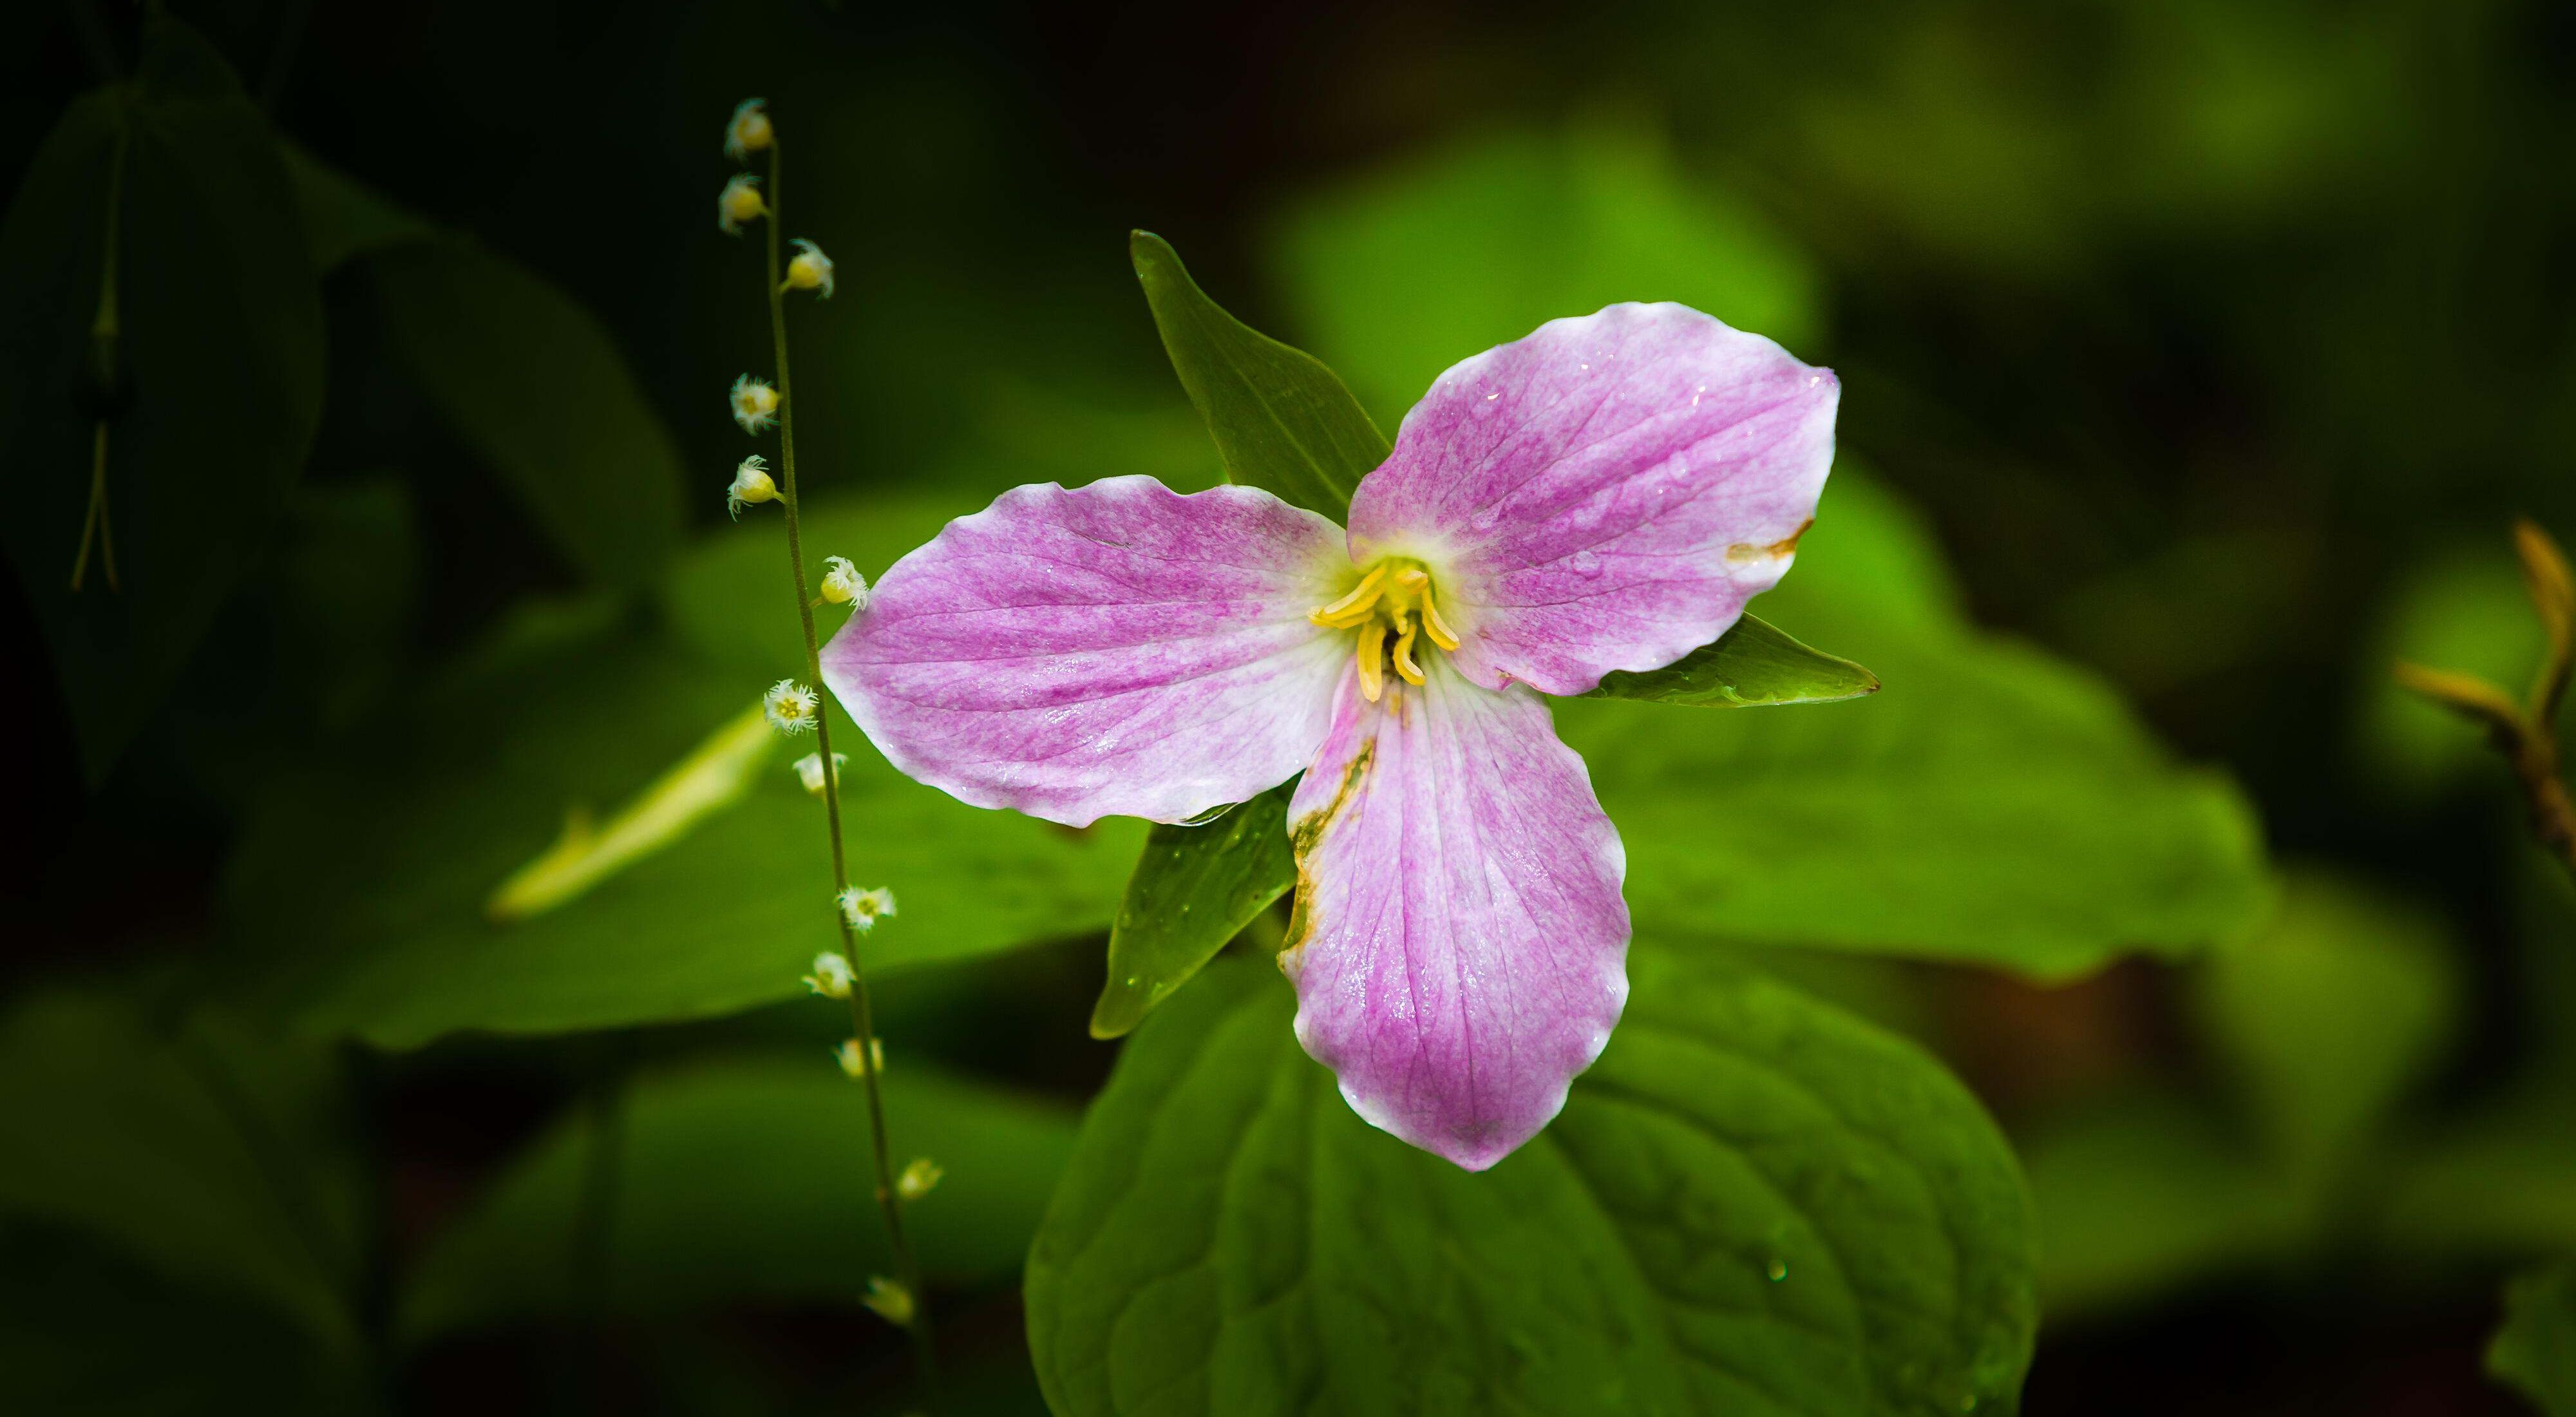 The pink, white and yellow blossom of a trillium flower. It's surrounded by vibrant green leaves. 